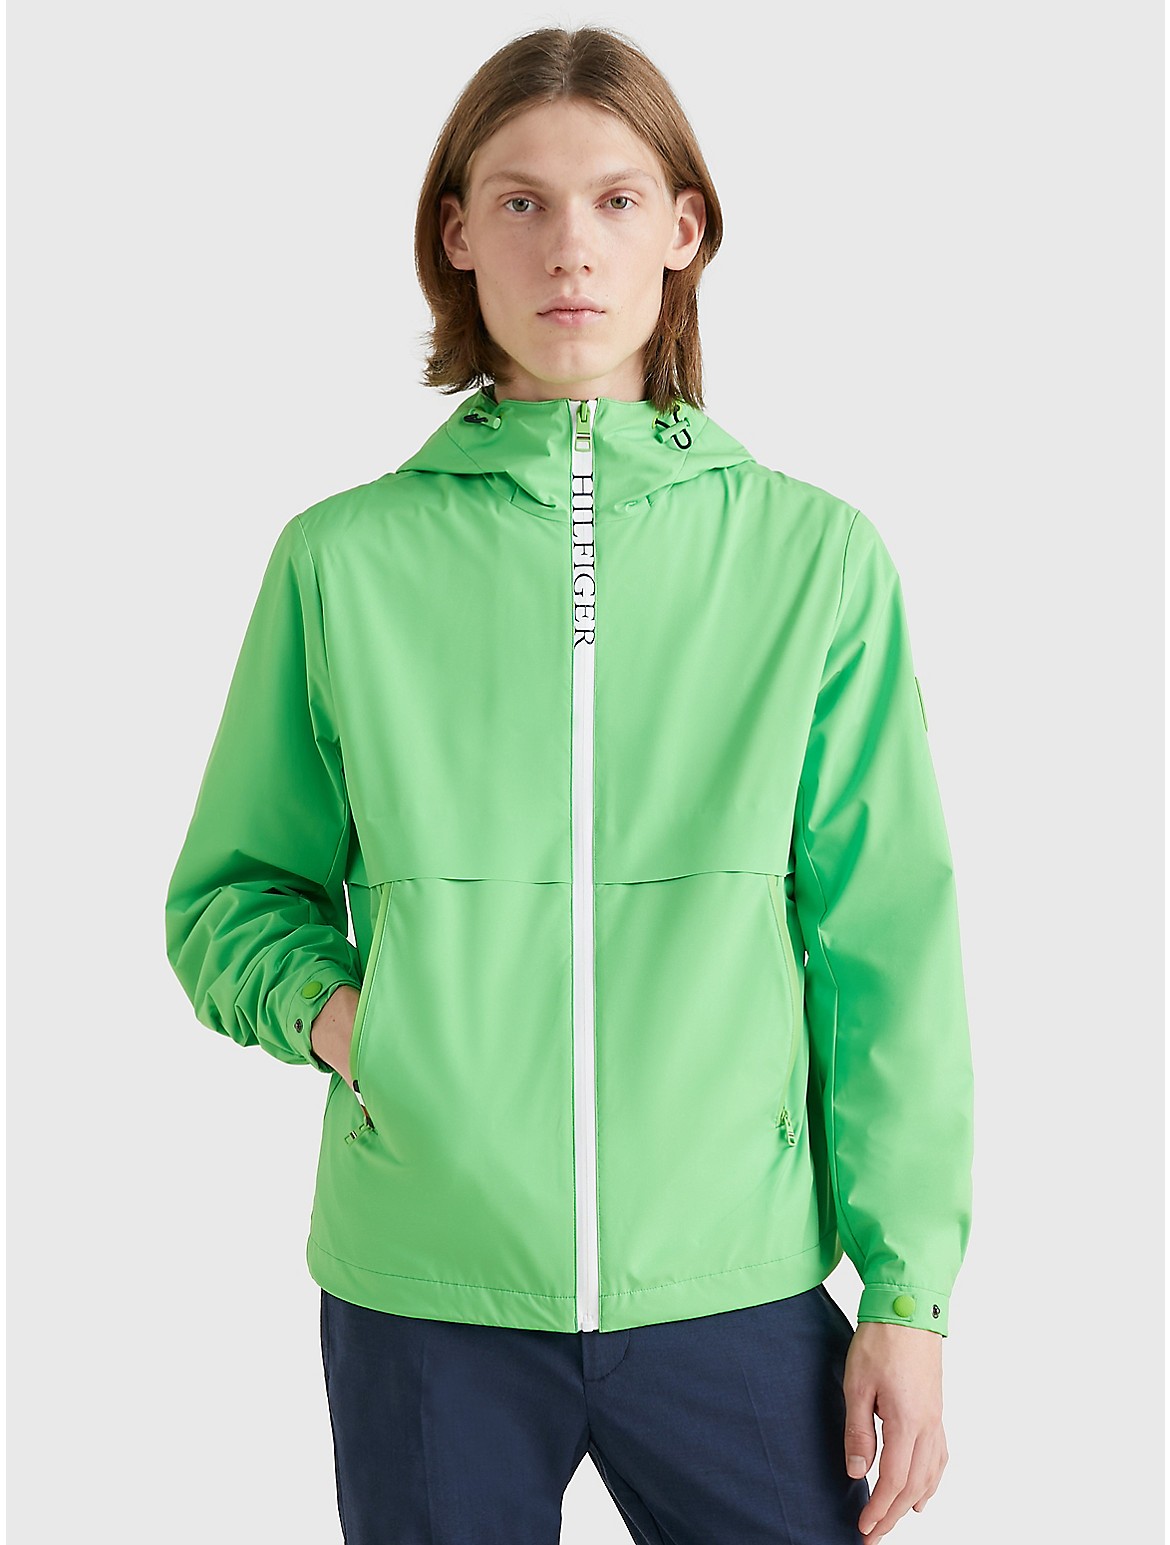 Tommy Hilfiger Men's THProtect Hooded Sailing Windbreaker - Green - XL